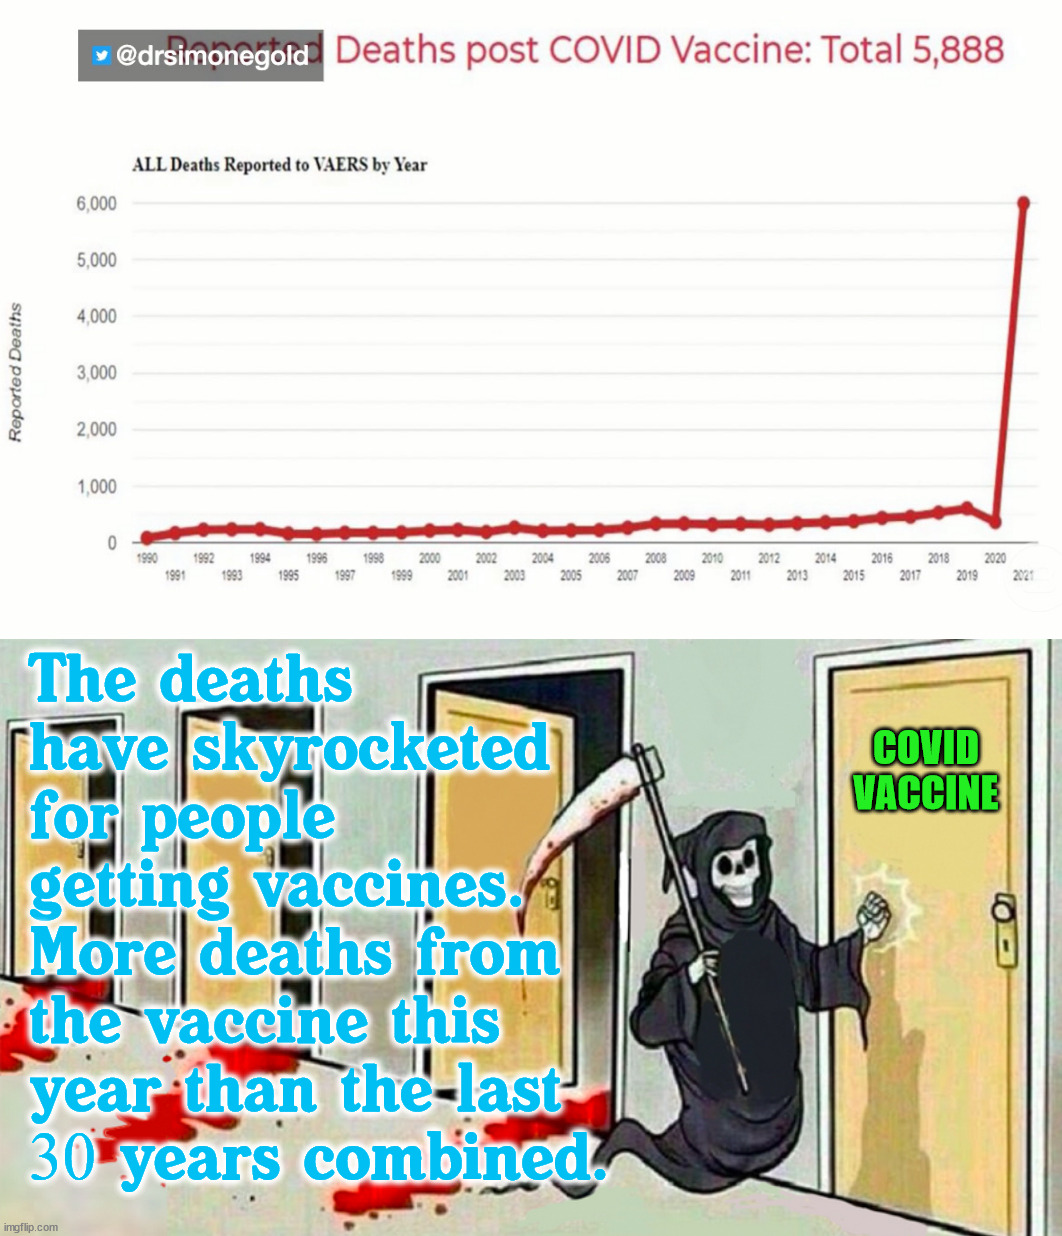 The vaccine has been very harmful to many people. | The deaths have skyrocketed for people getting vaccines. More deaths from the vaccine this year than the last 
30 years combined. COVID
VACCINE | image tagged in death knocking at the door,vaccine,covid | made w/ Imgflip meme maker